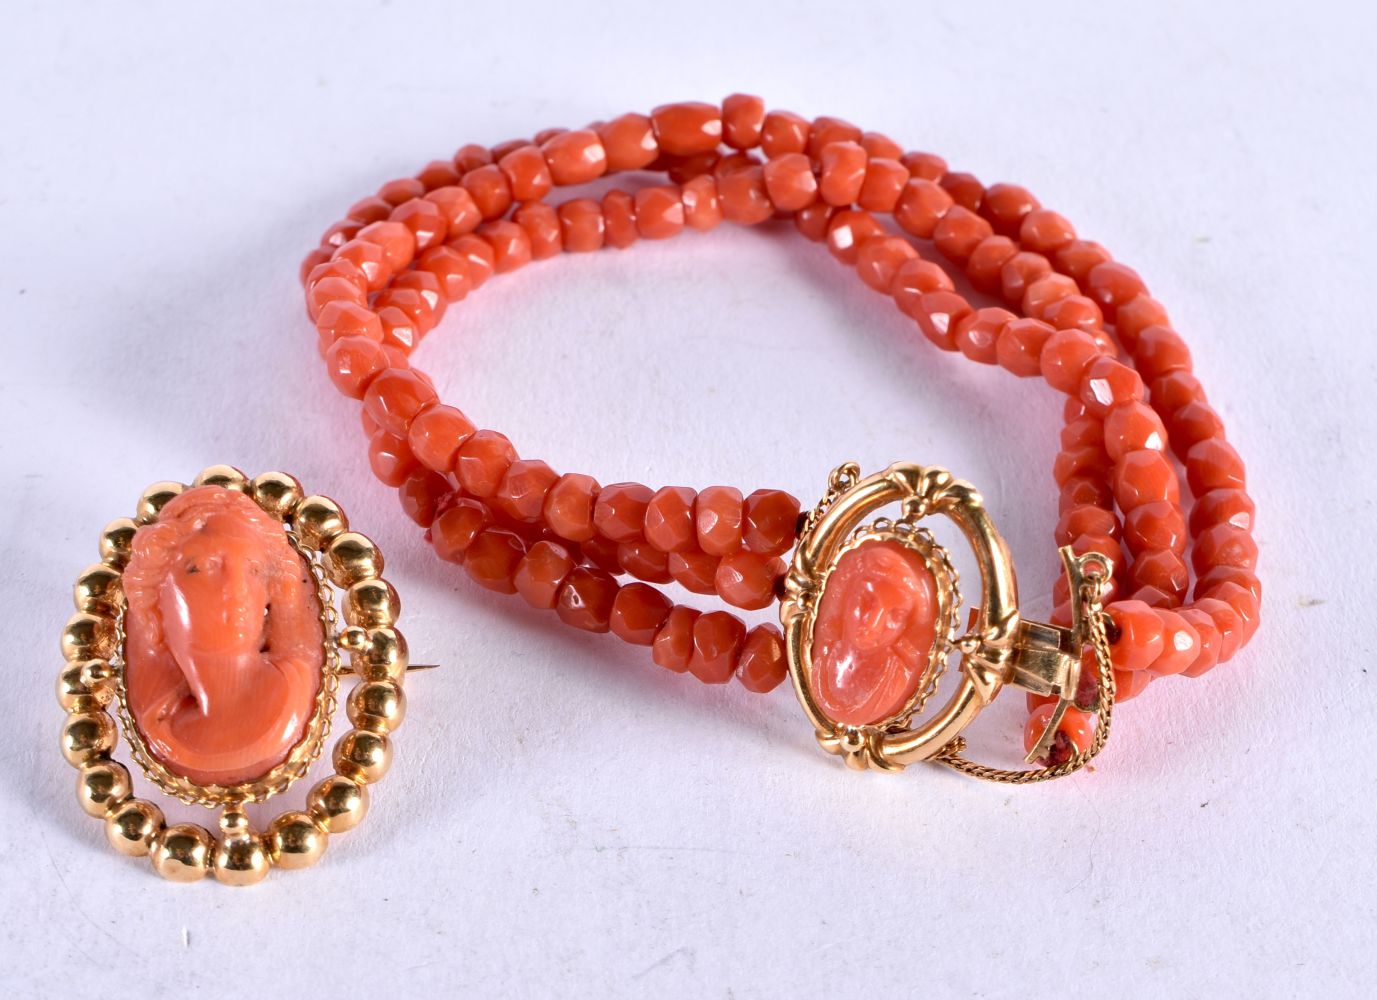 A High Carat Gold Mounted Coral Bracelet and Brooch. Chinese Marks, Bracelet 18cm long, Brooch 3